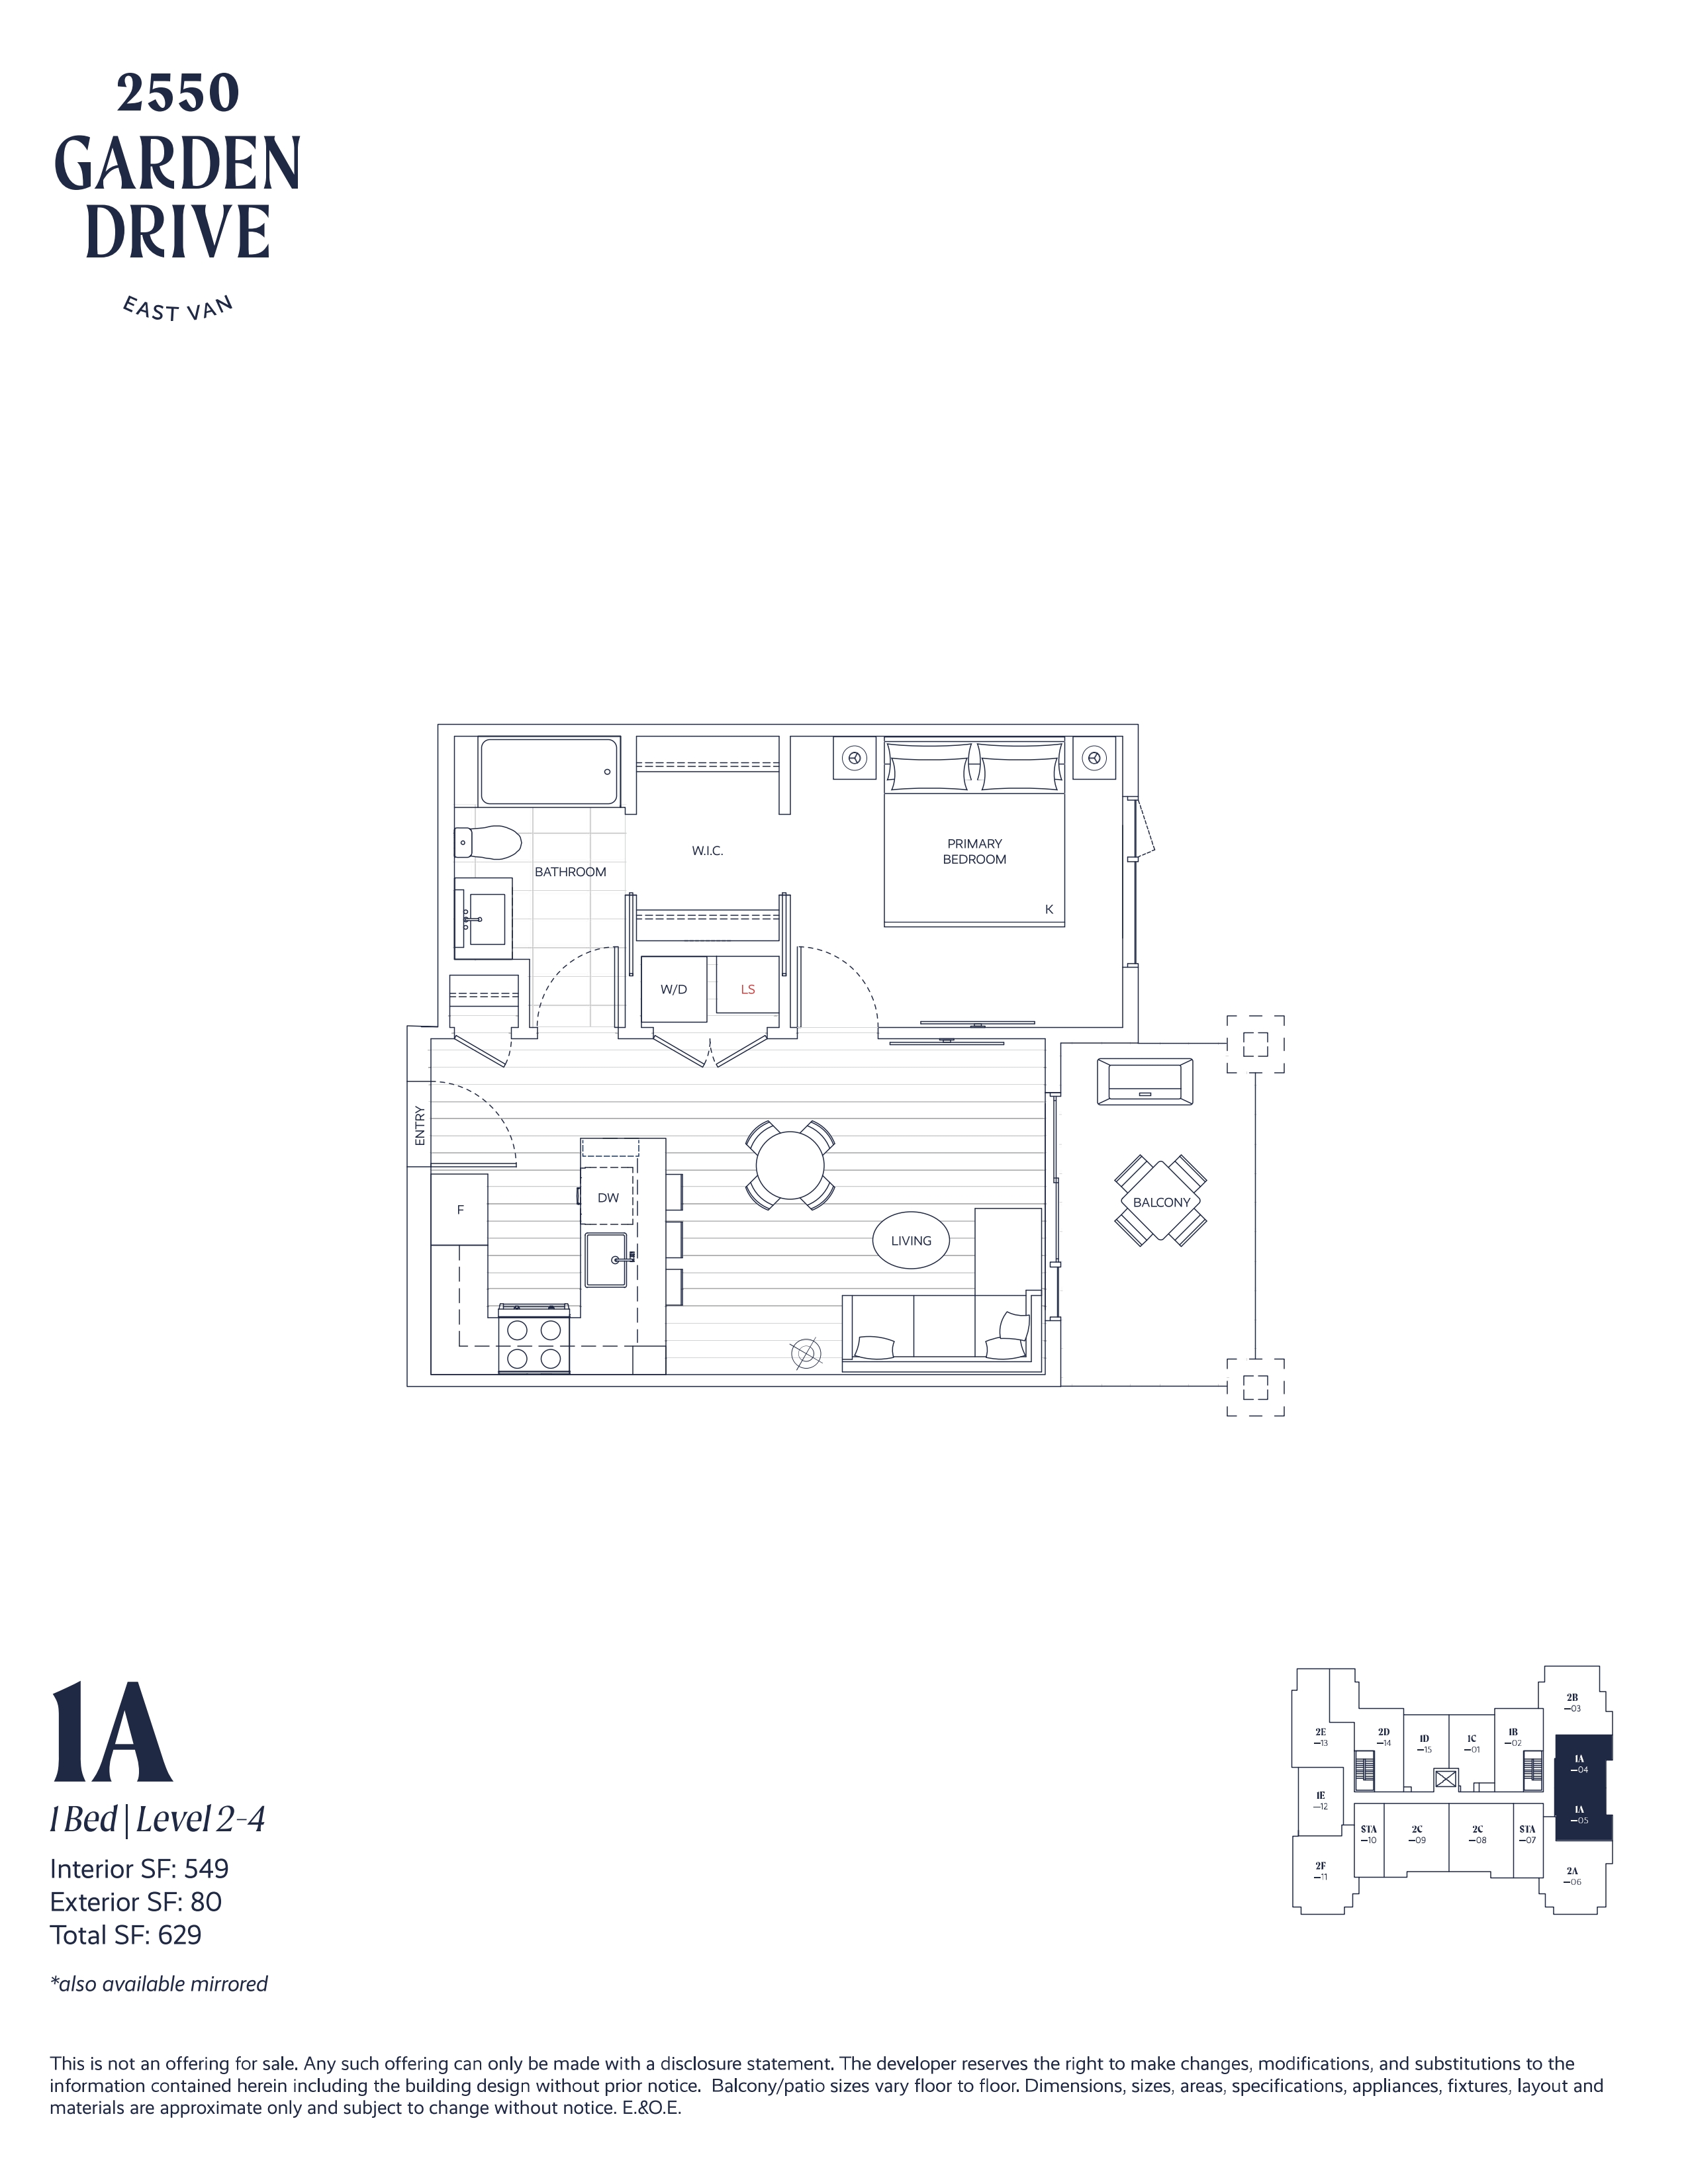 1A Floor Plan of 2550 Garden Drive Condos with undefined beds